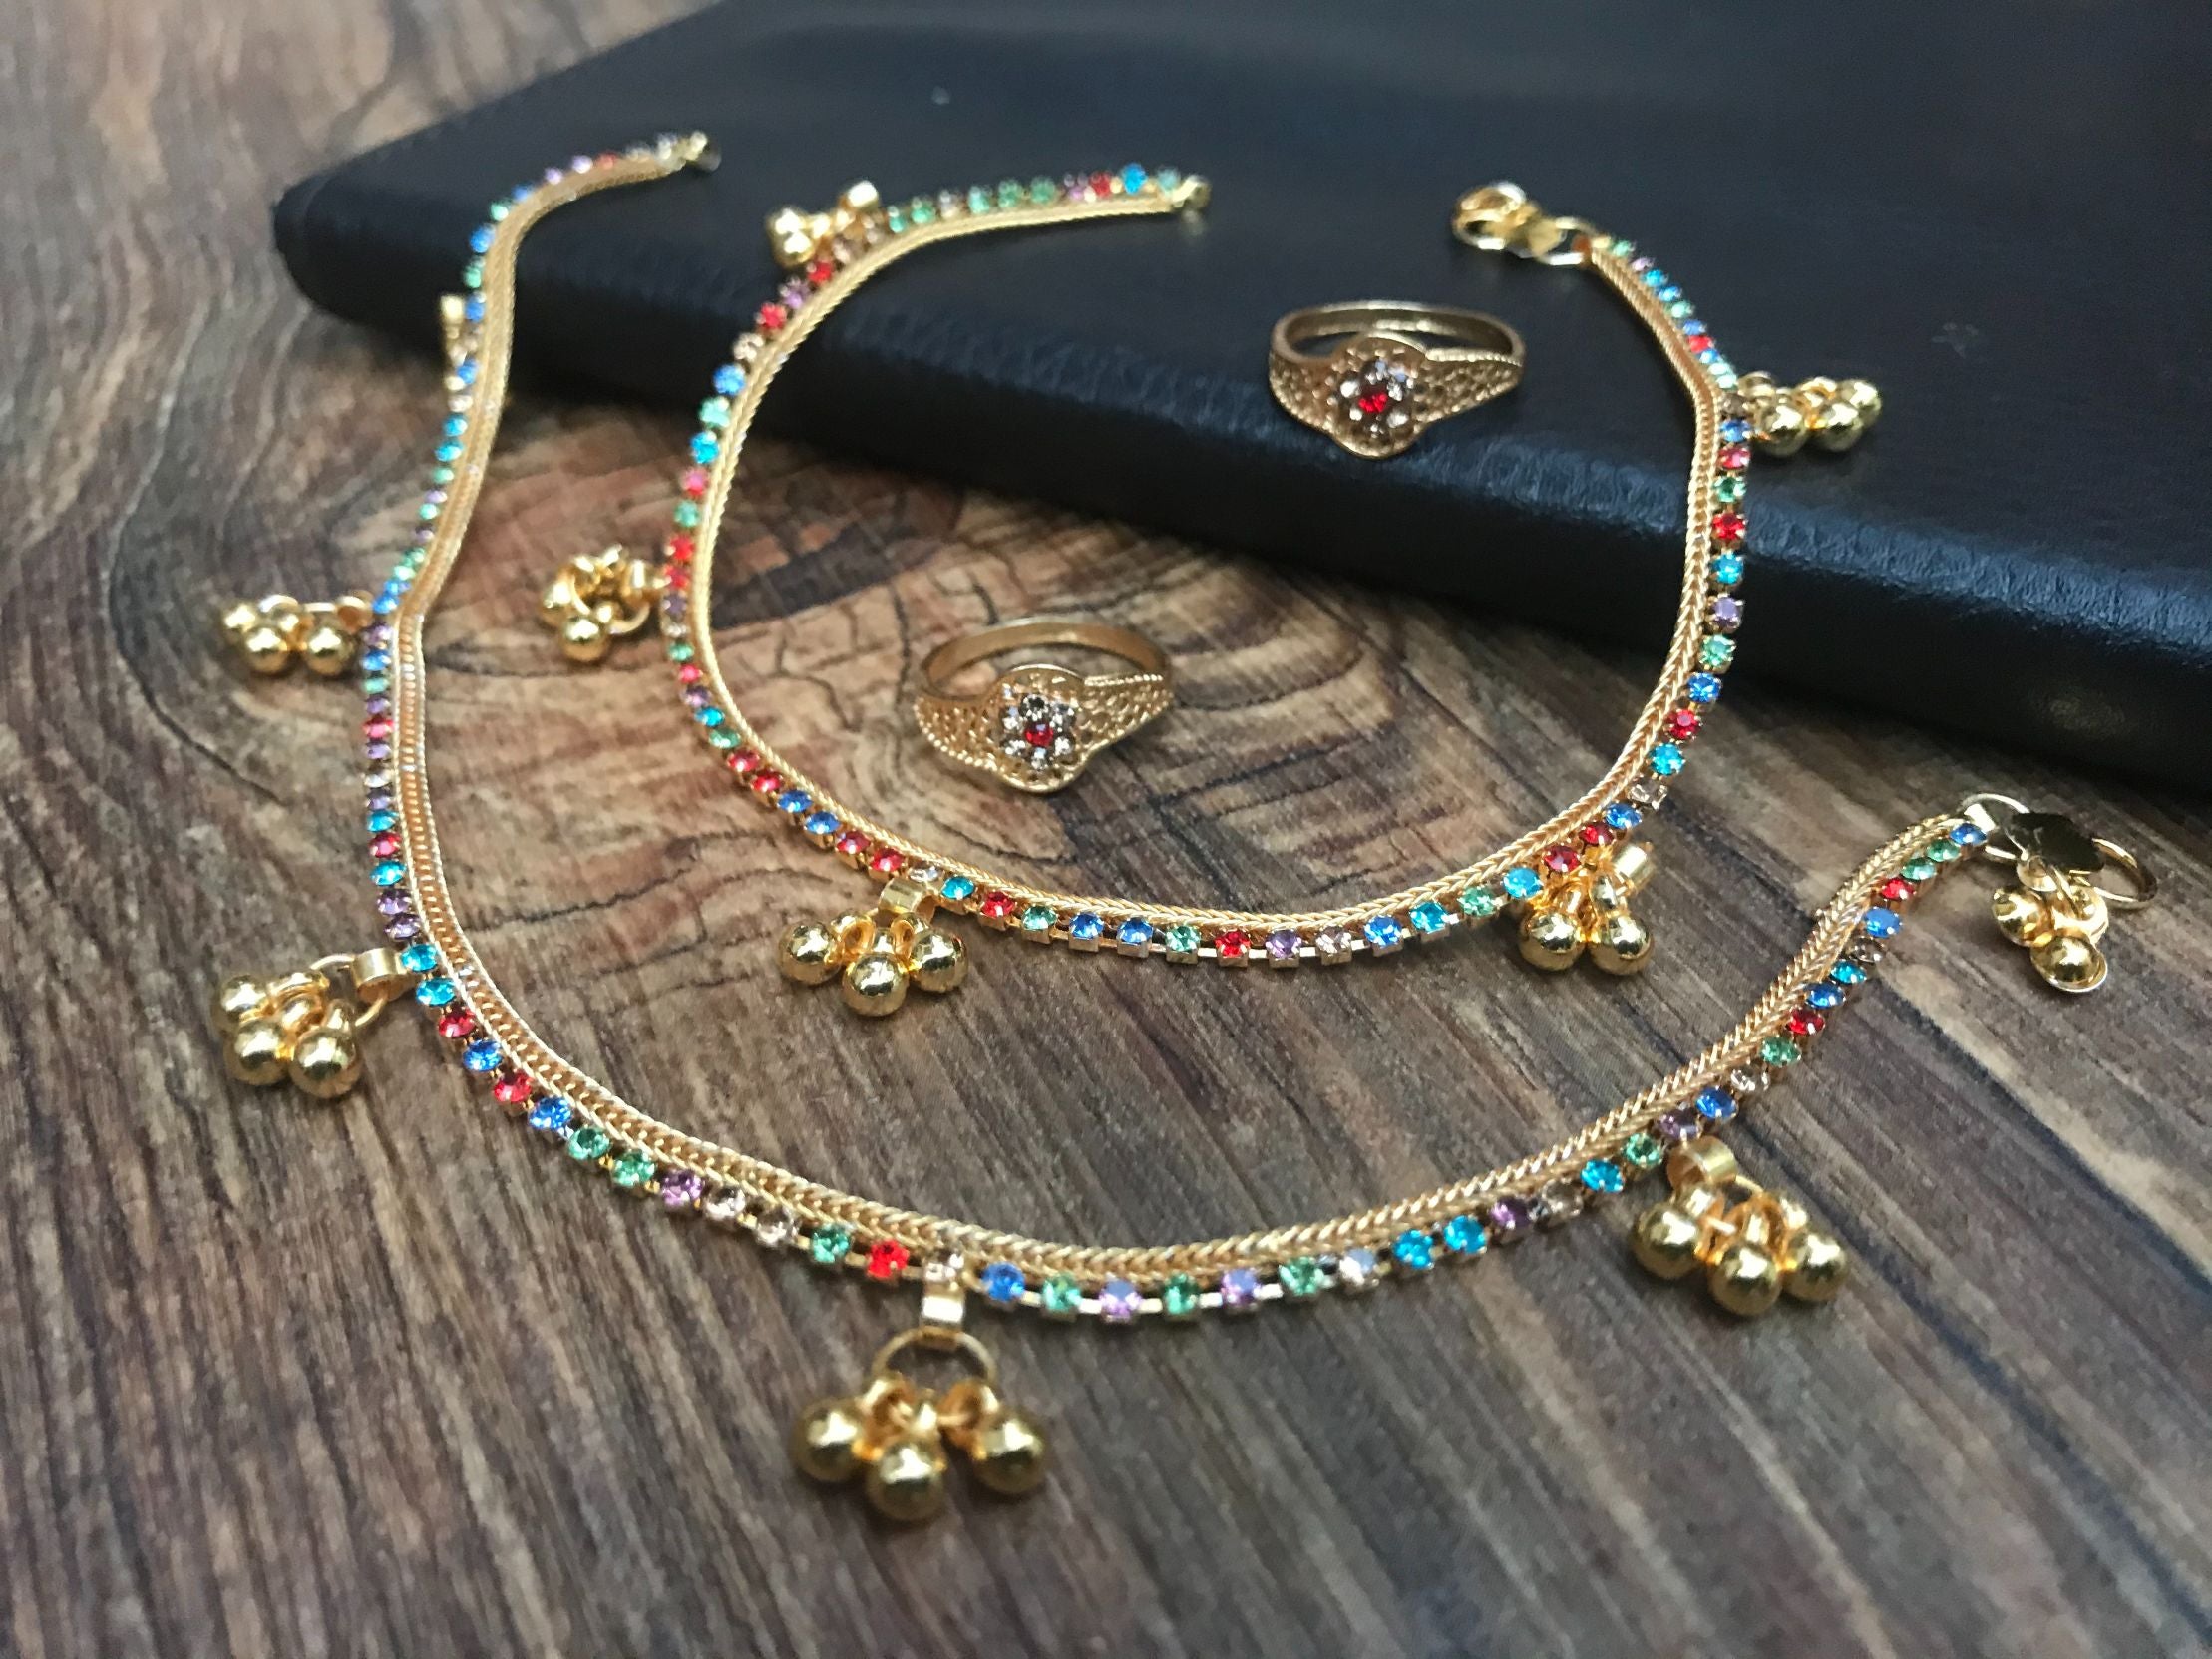 Best 50% Anklets Buy Abdesigns Off to – Up Abdesignsjewellery on - Rates |